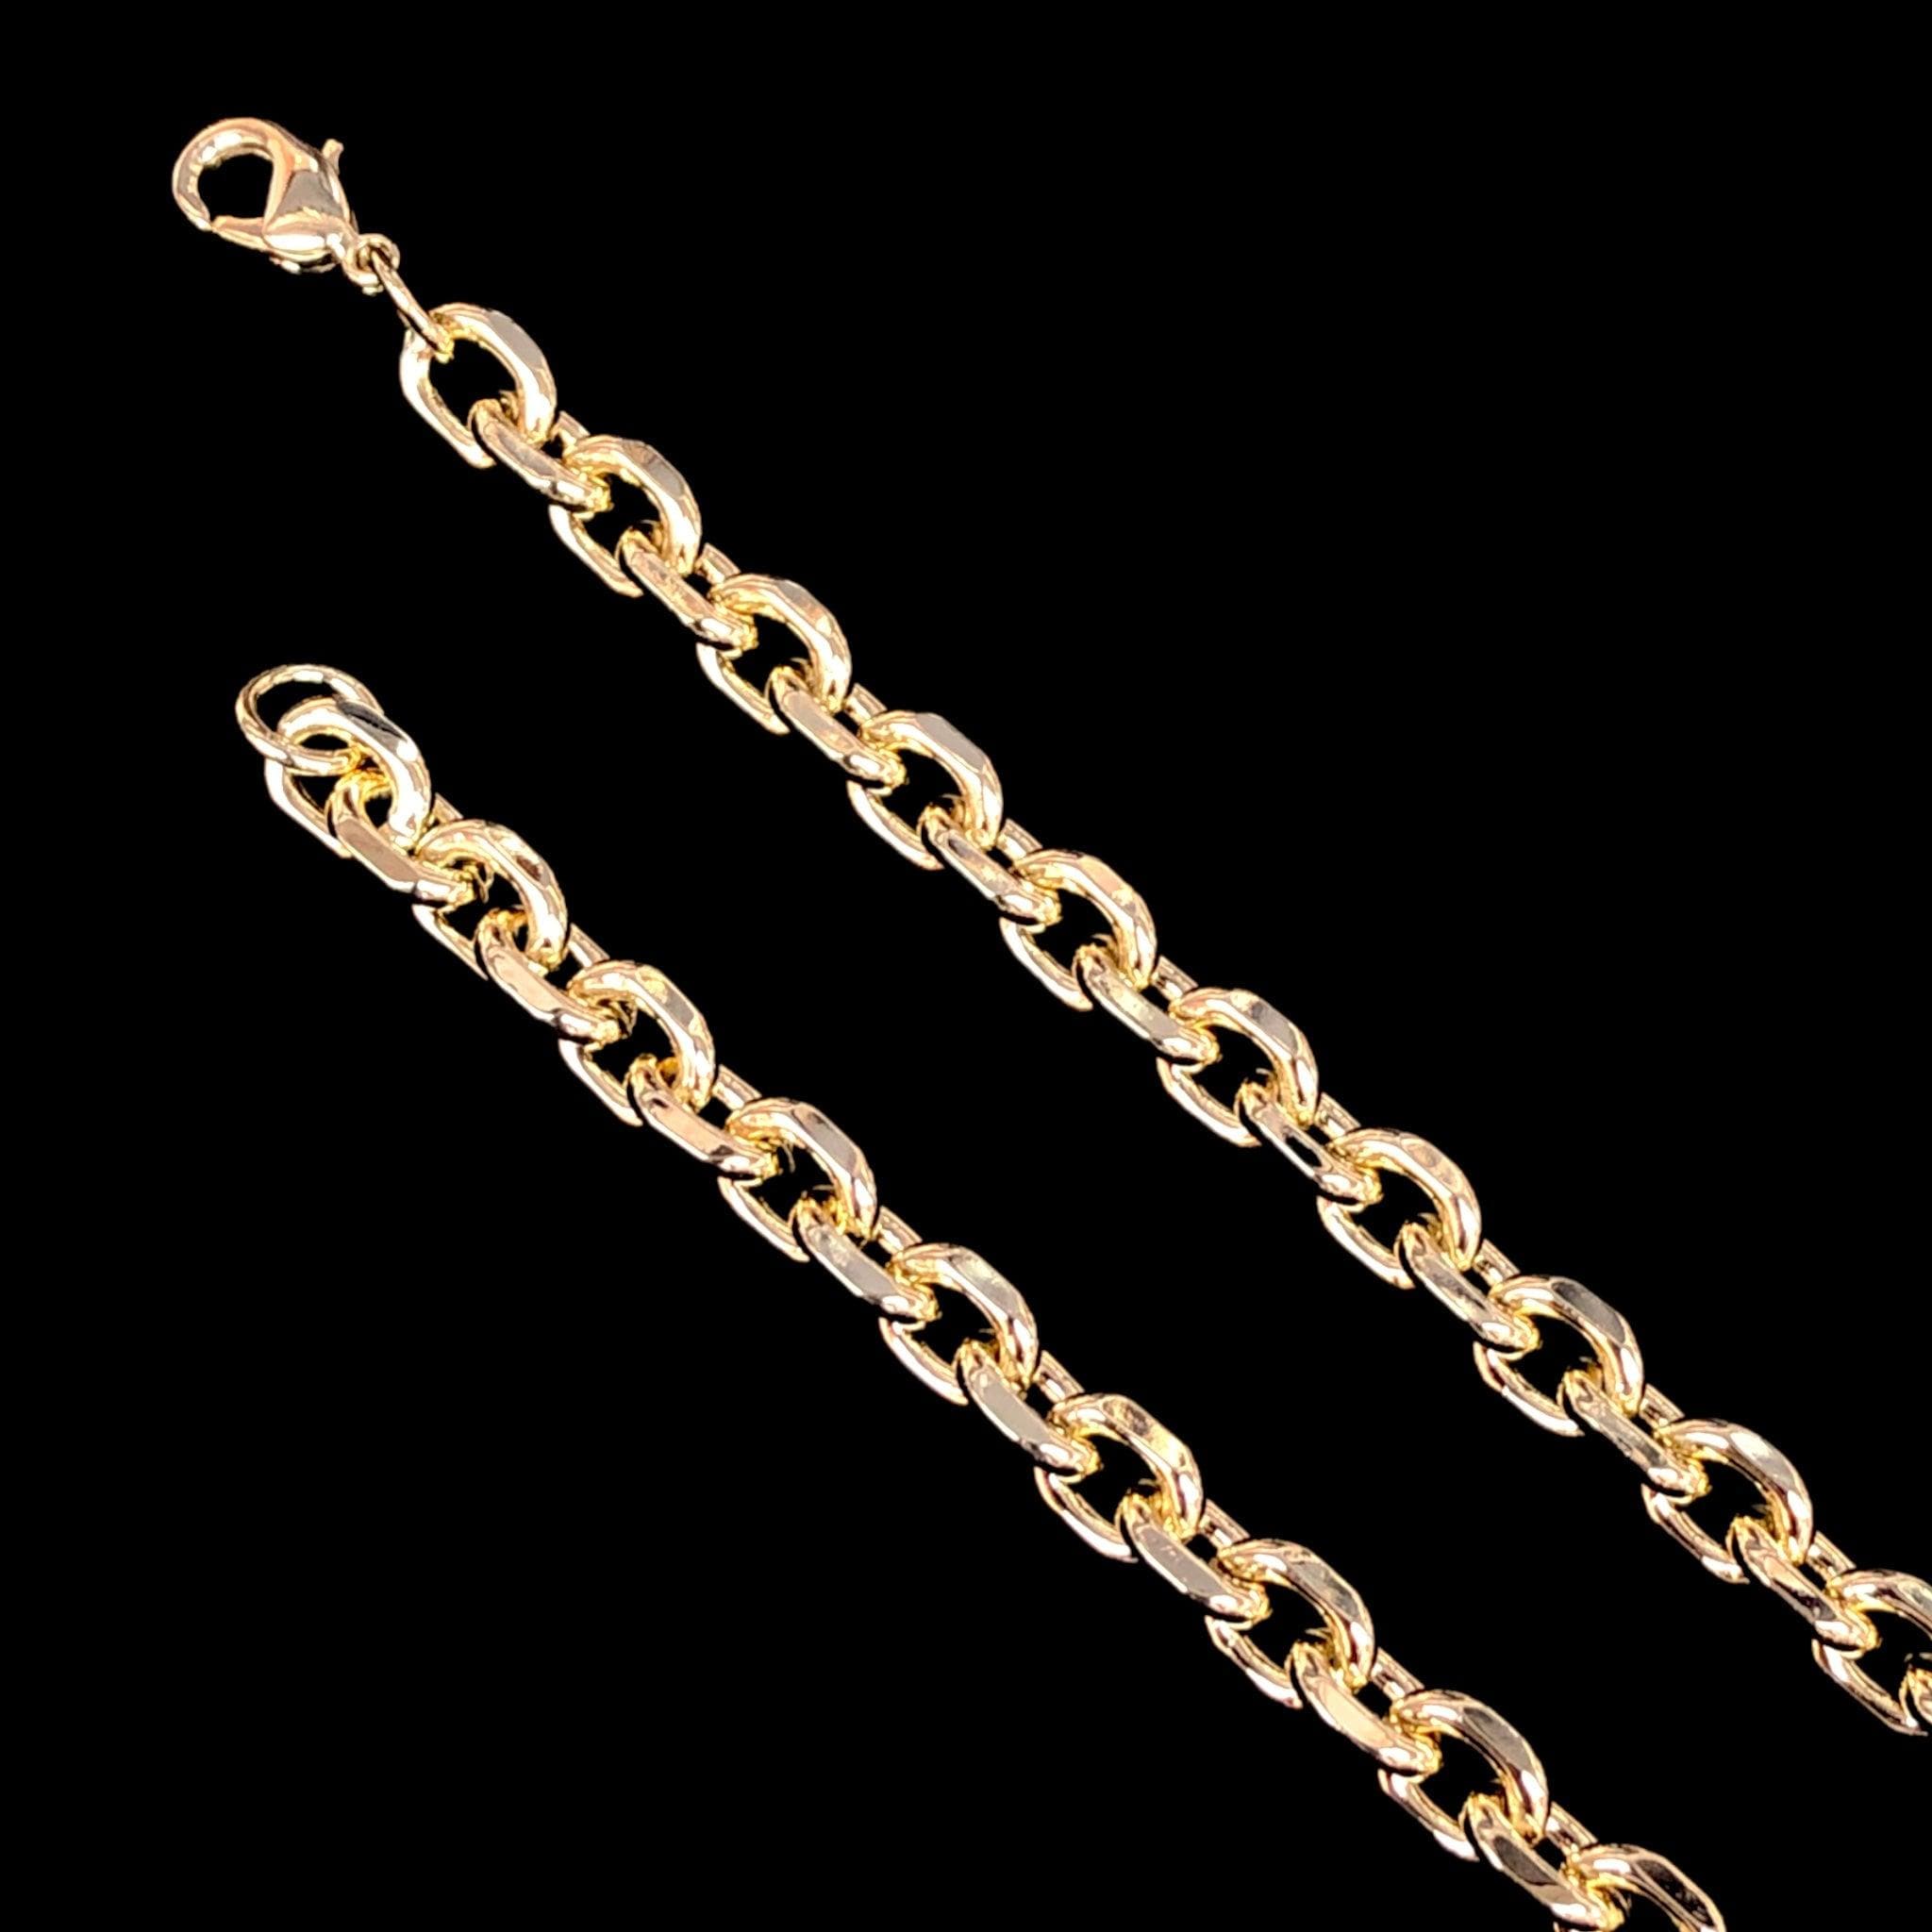 18K Gold-Filled 6mm Milano Cuban Chain (Pack of 3) -18K Gold Filled Oro Laminado CHAIN - KUANIA